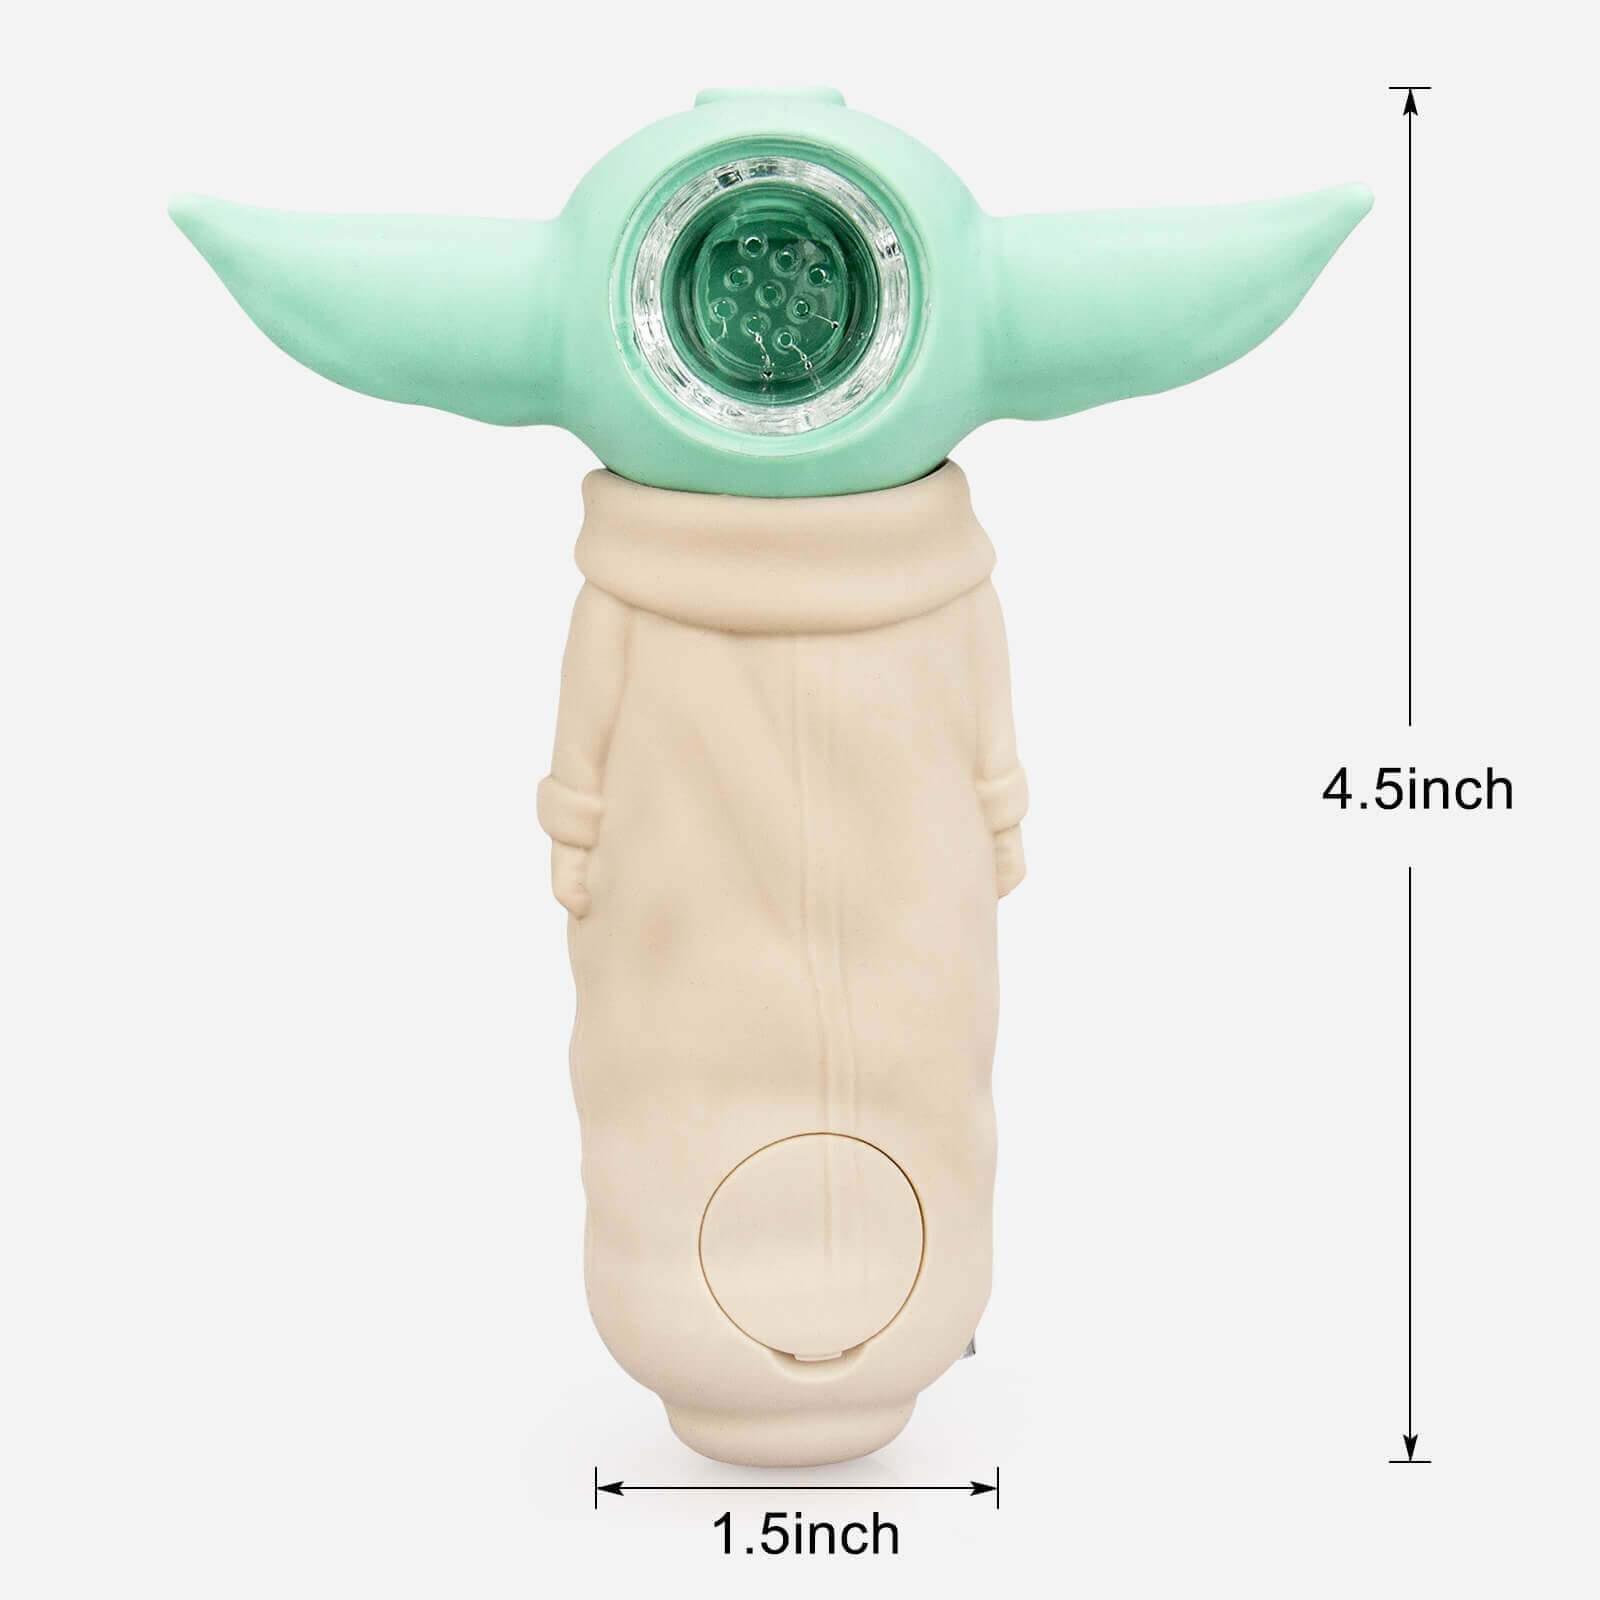 Baby Yoda Portable Silicone Hand Pipe - PILOT DIARY